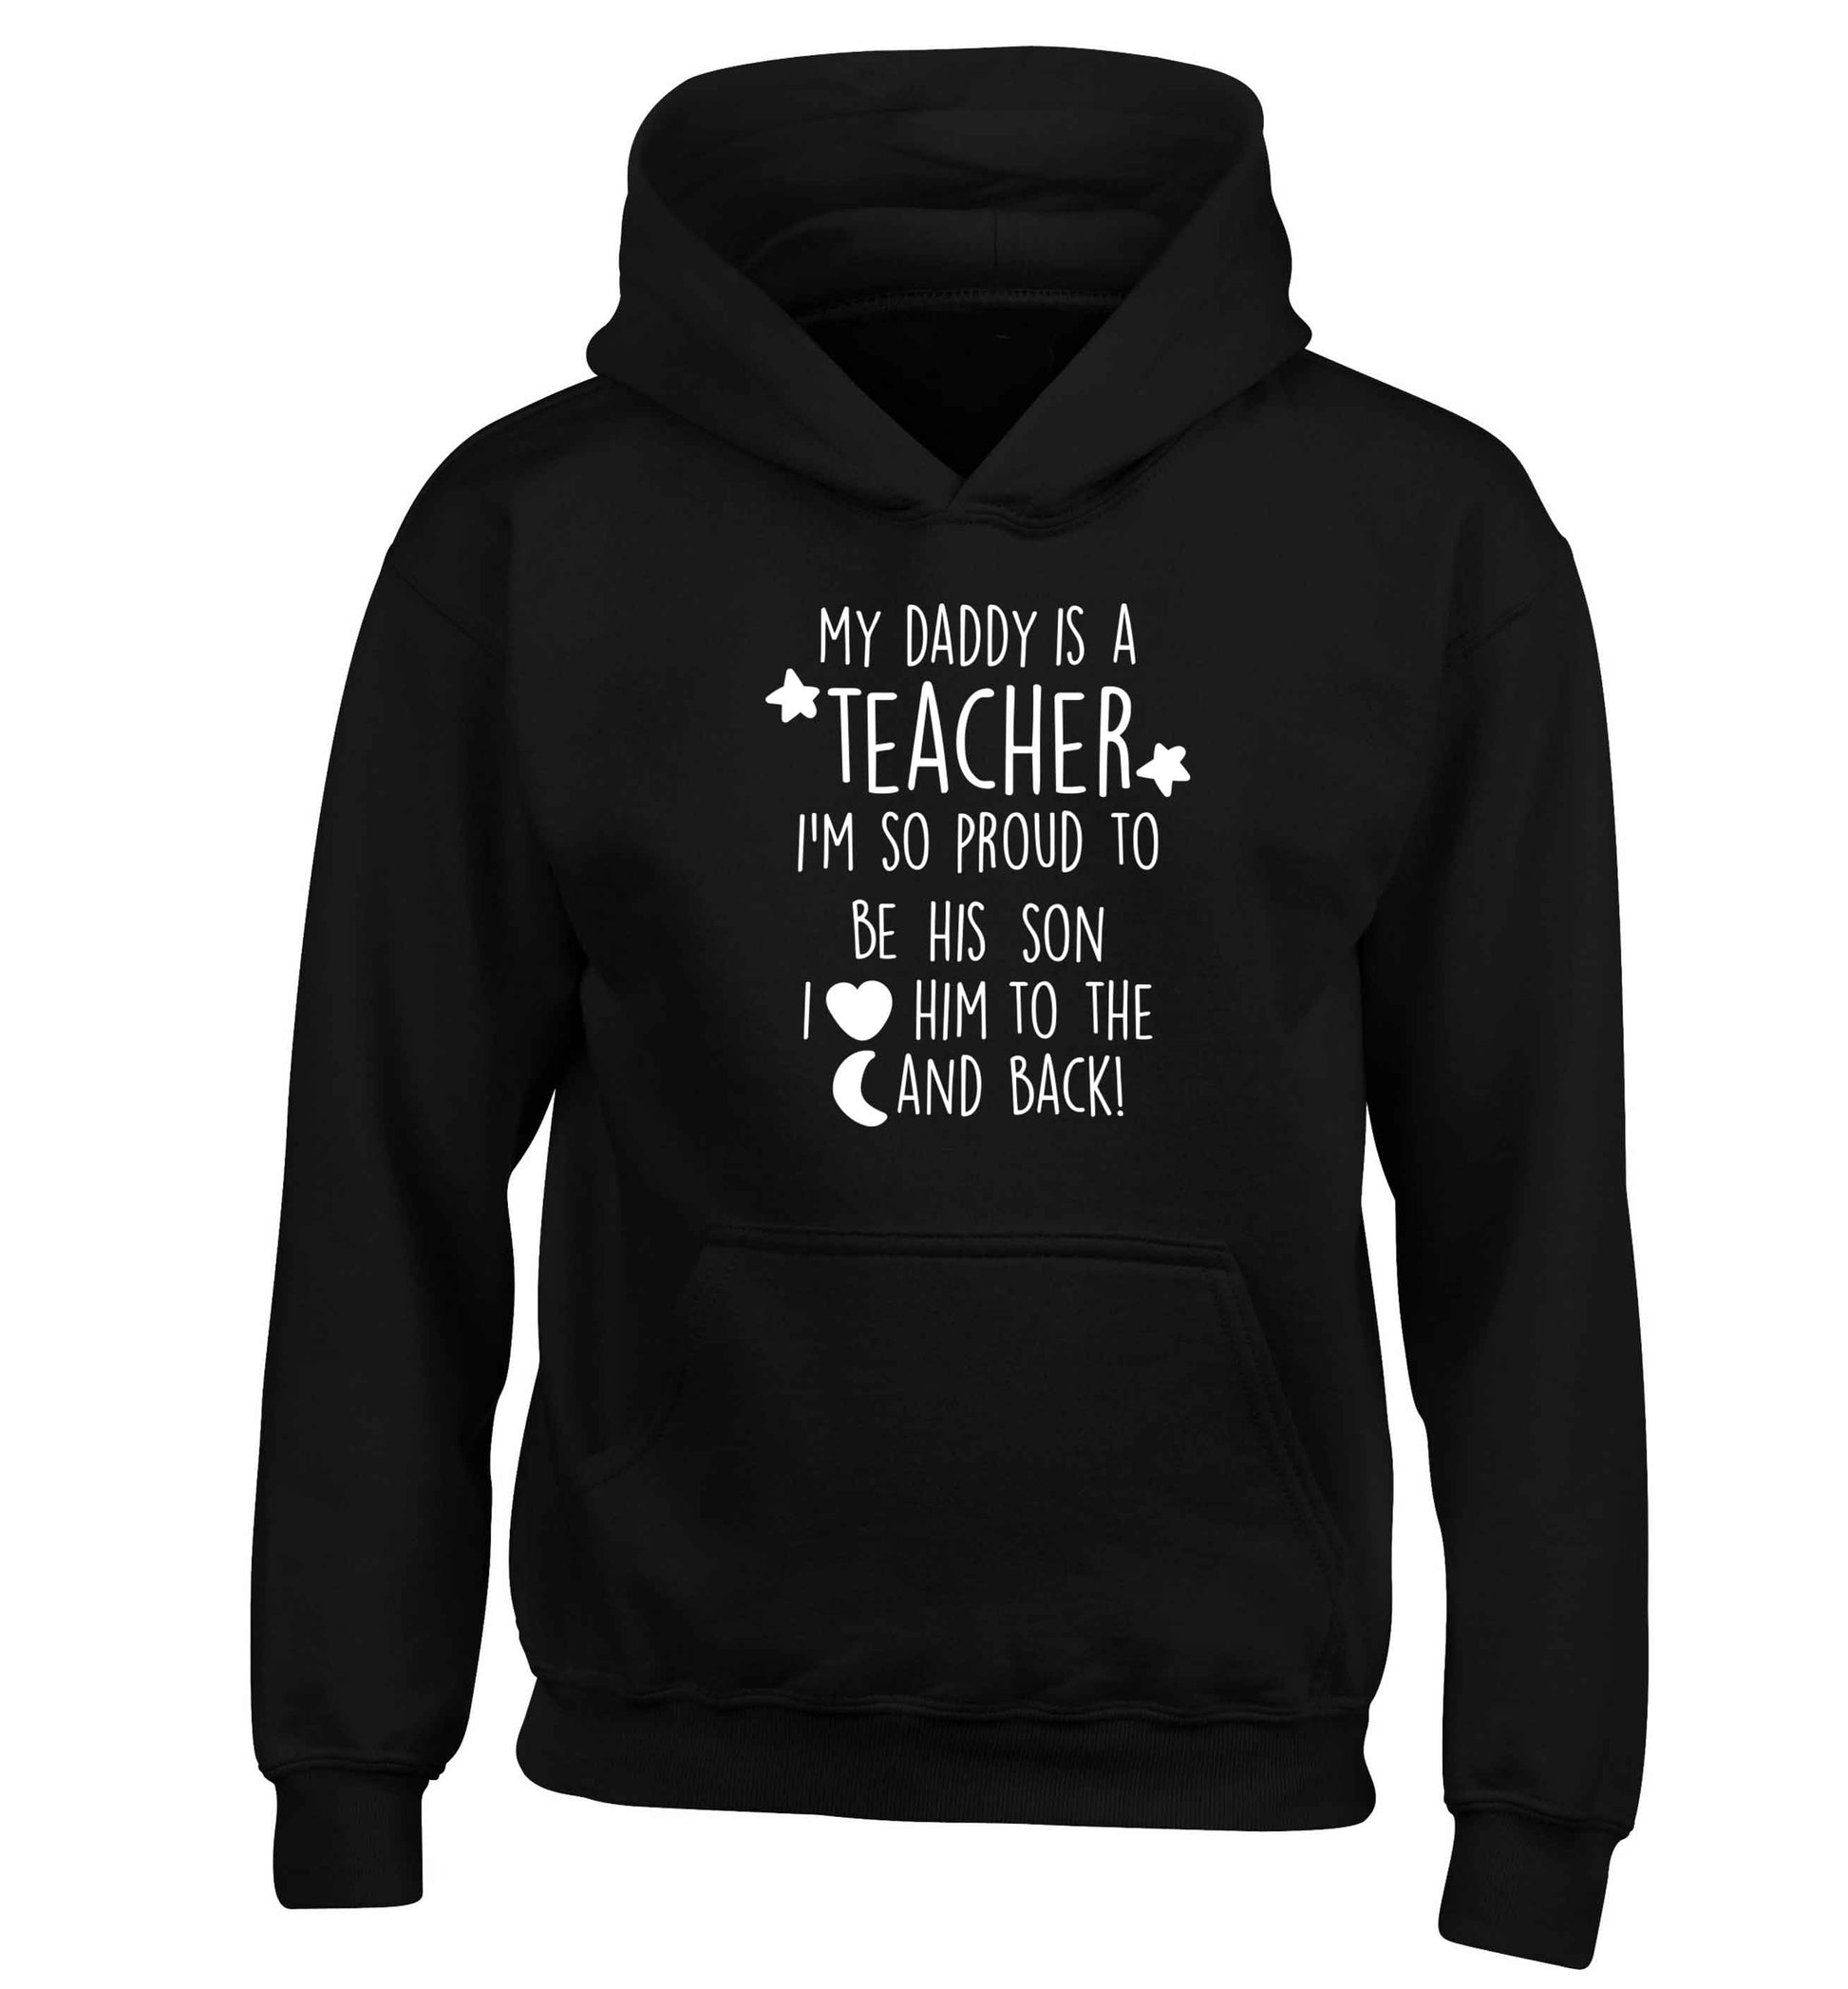 My daddy is a teacher I'm so proud to be his son I love her to the moon and back children's black hoodie 12-13 Years